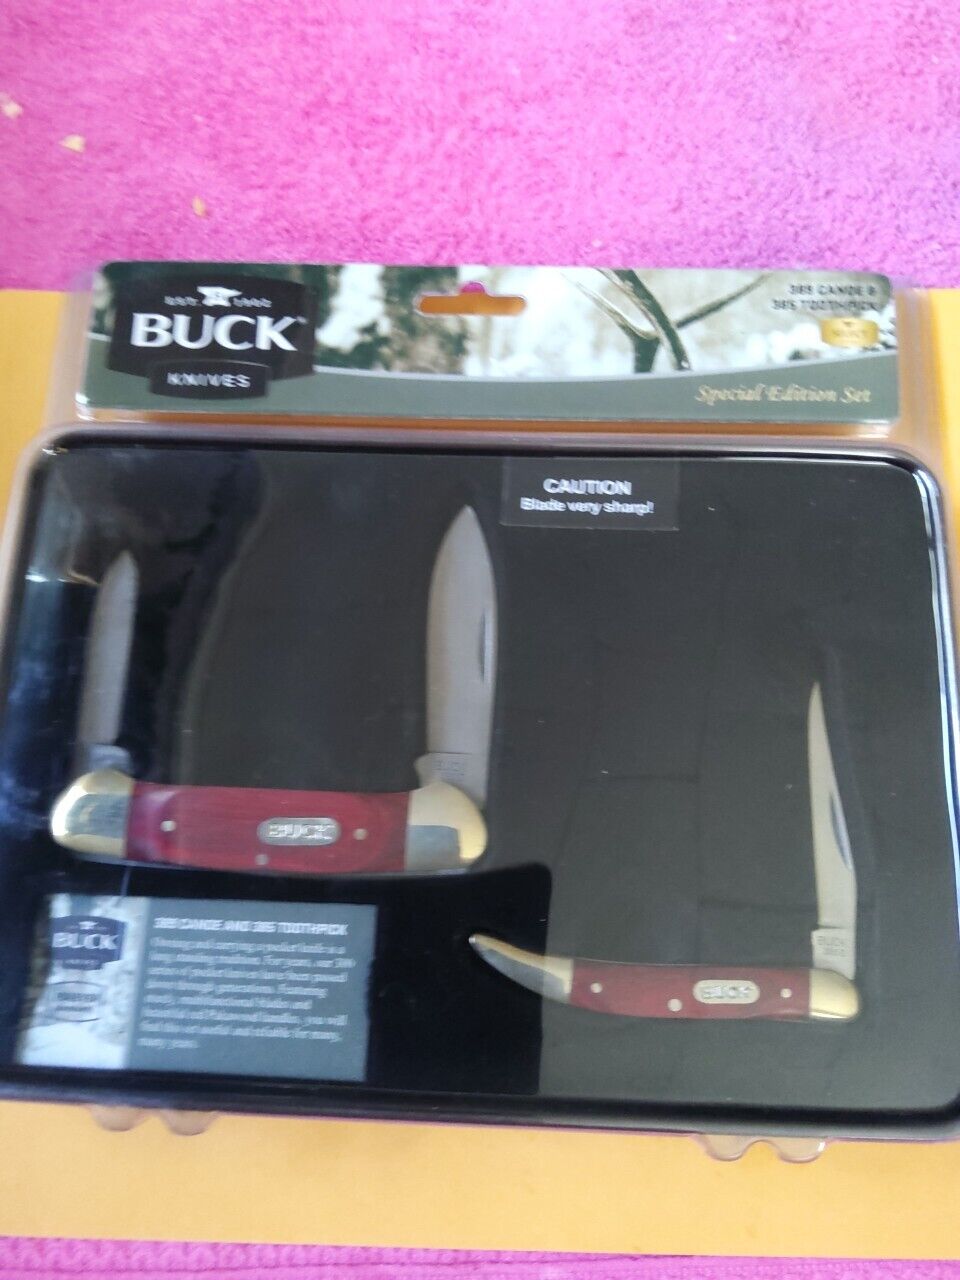 Buck Knives Special Edition 389 Canoe and 385 Toothpick Knives Collective Tin